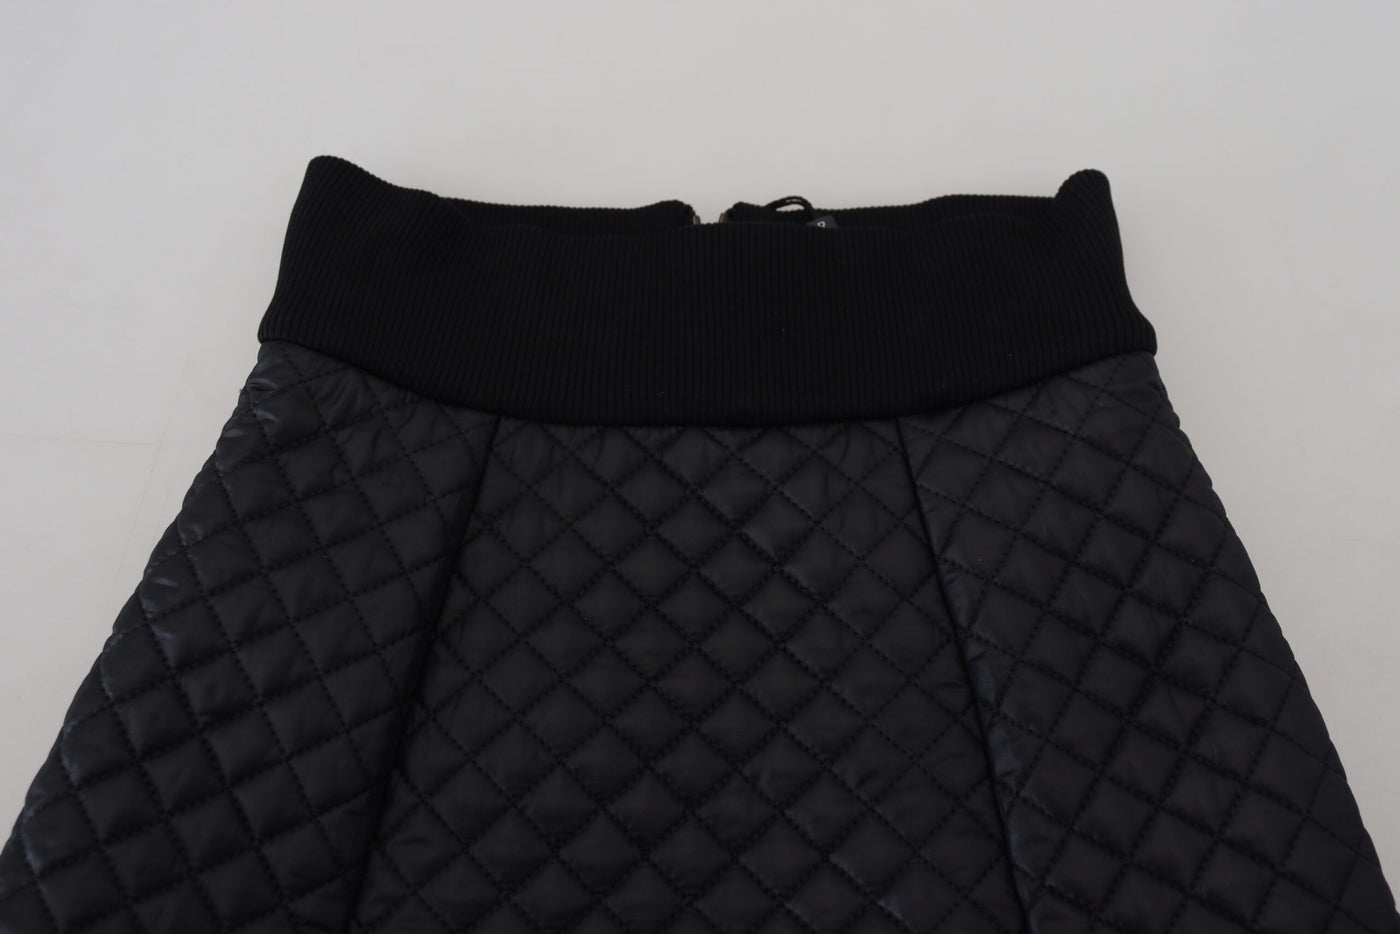 Black Quilted High Waist Hot Pants Shorts